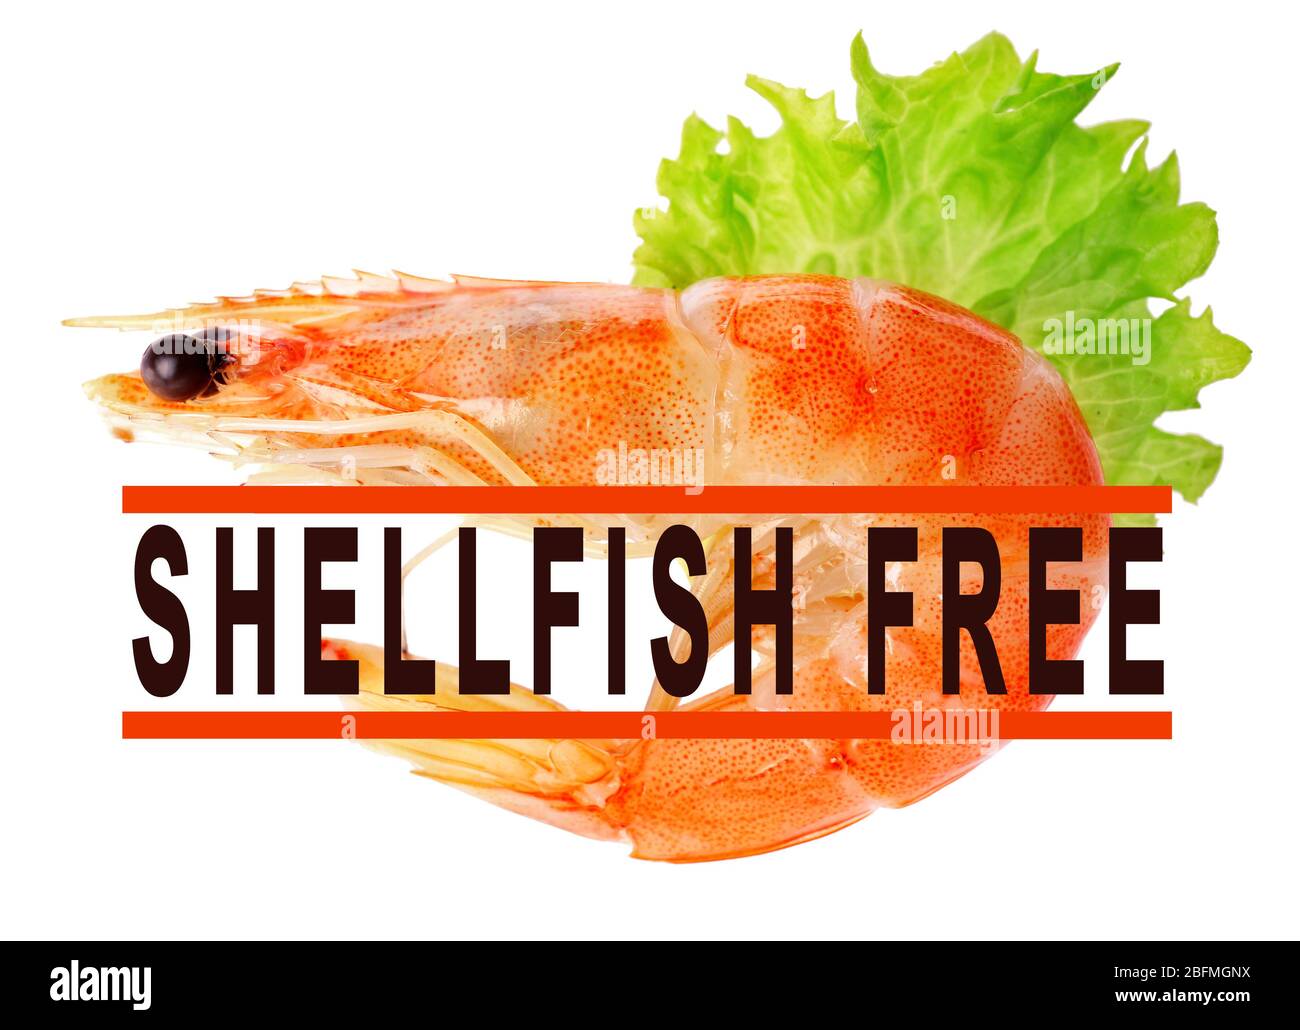 Boiled shrimp with lettuce and shellfish free sign isolated on white Stock Photo